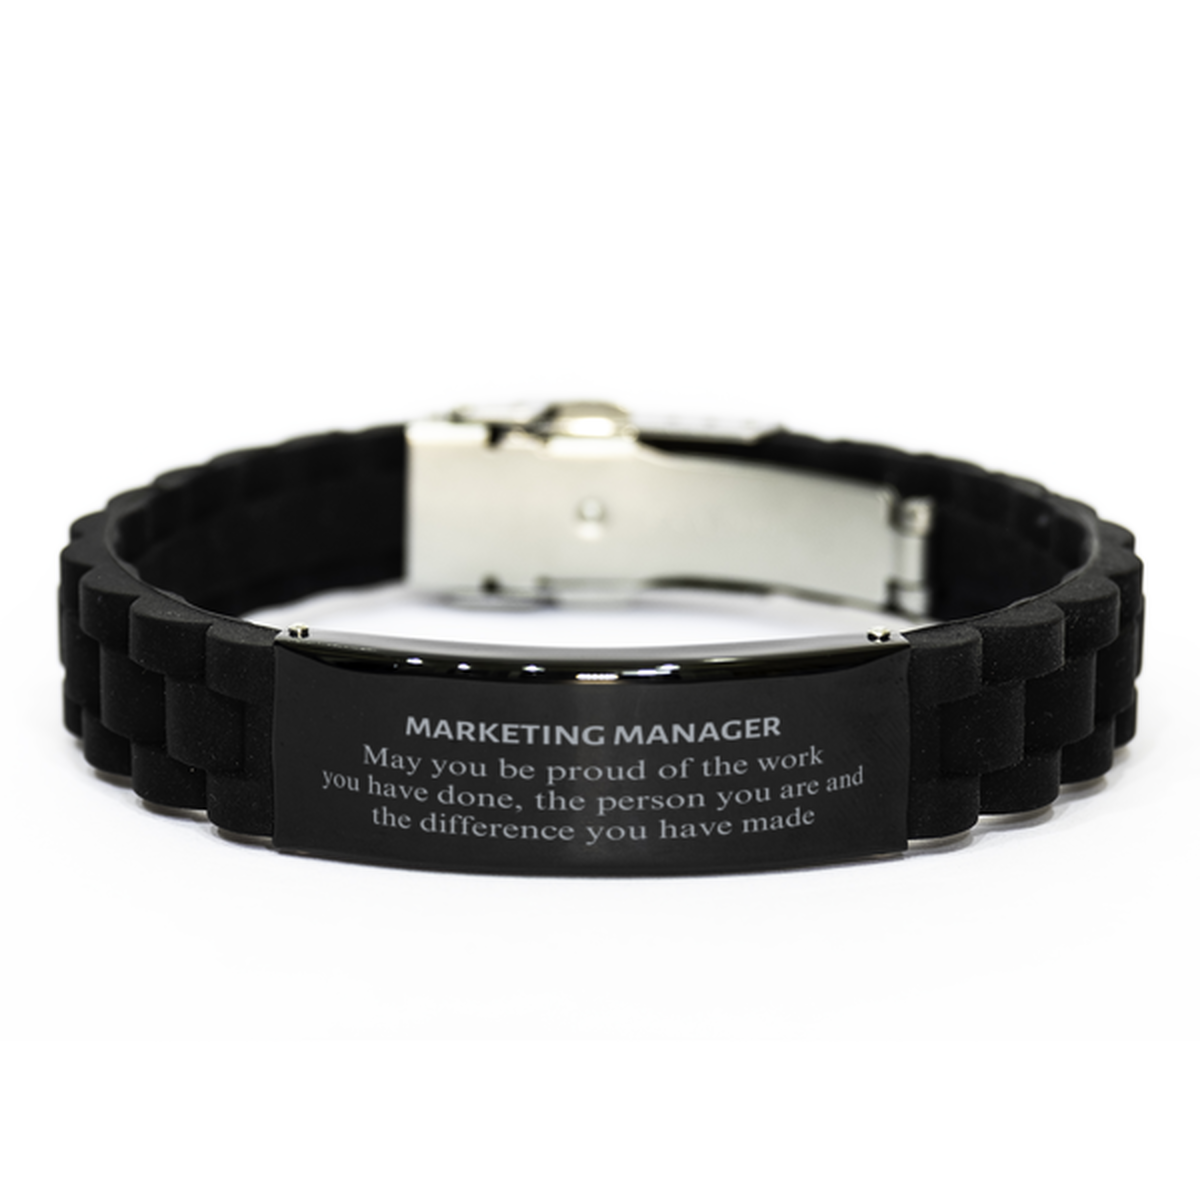 Marketing Manager May you be proud of the work you have done, Retirement Marketing Manager Black Glidelock Clasp Bracelet for Colleague Appreciation Gifts Amazing for Marketing Manager